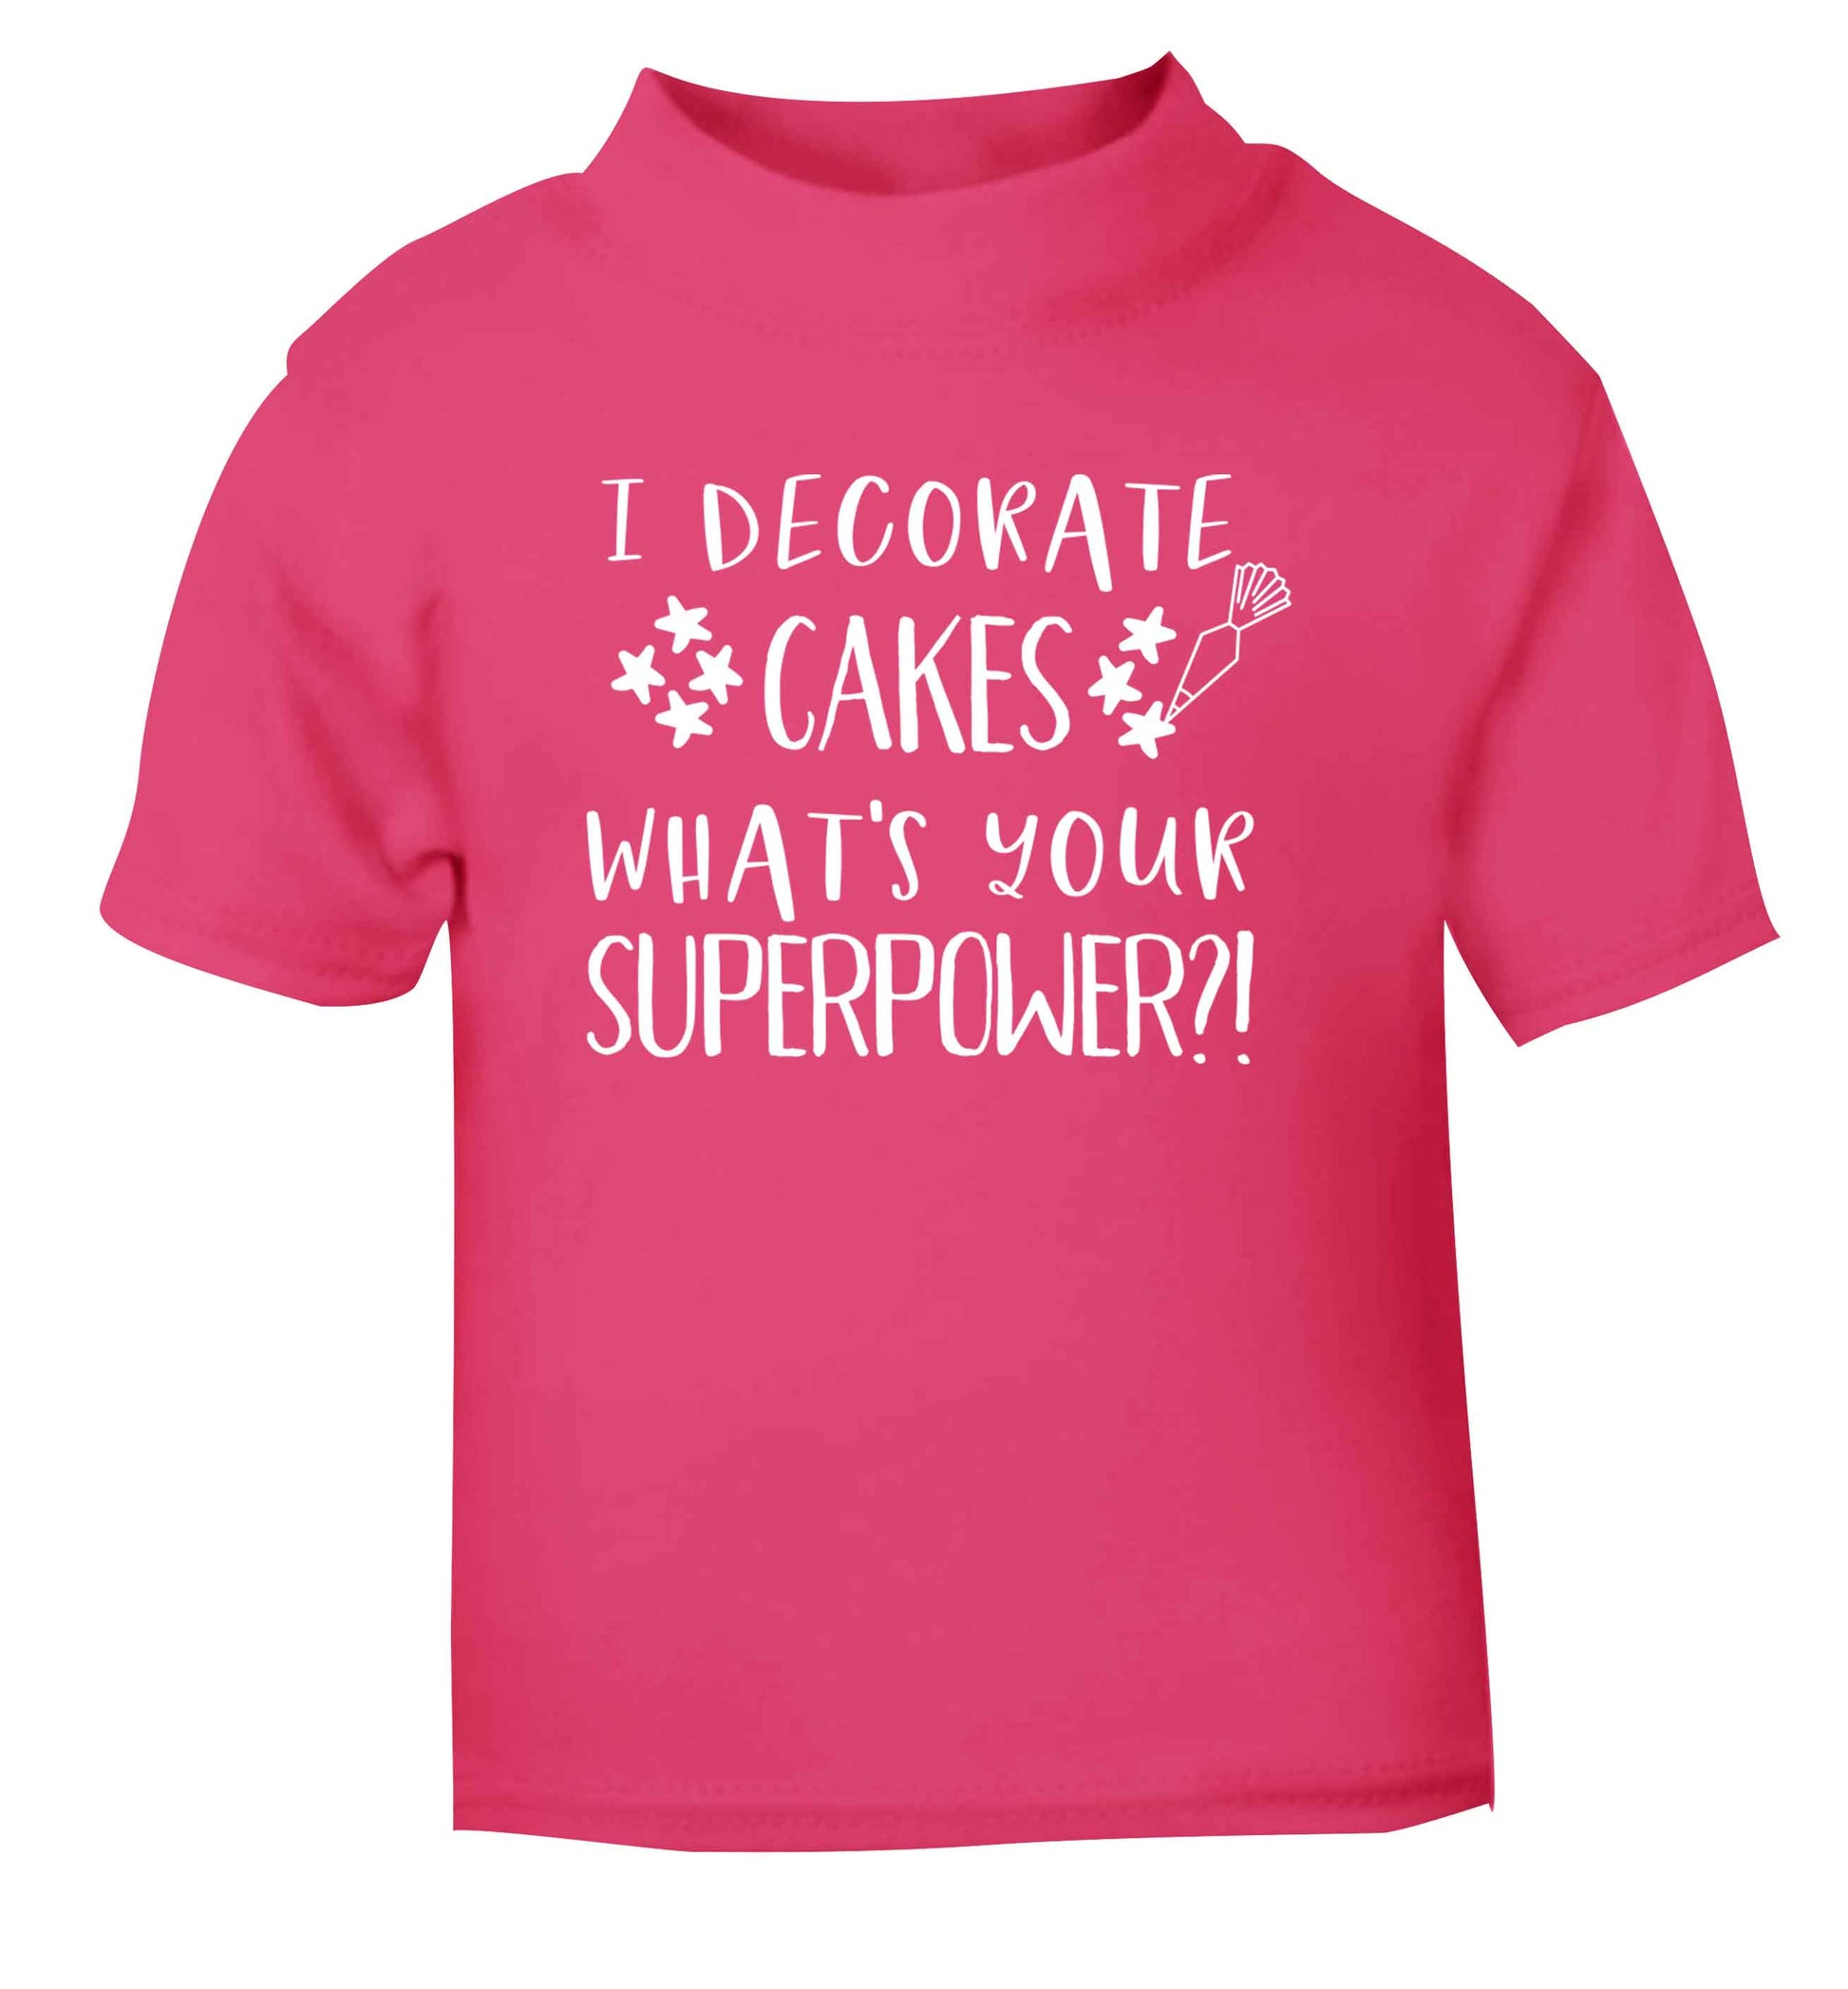 I decorate cakes what's your superpower?! pink Baby Toddler Tshirt 2 Years